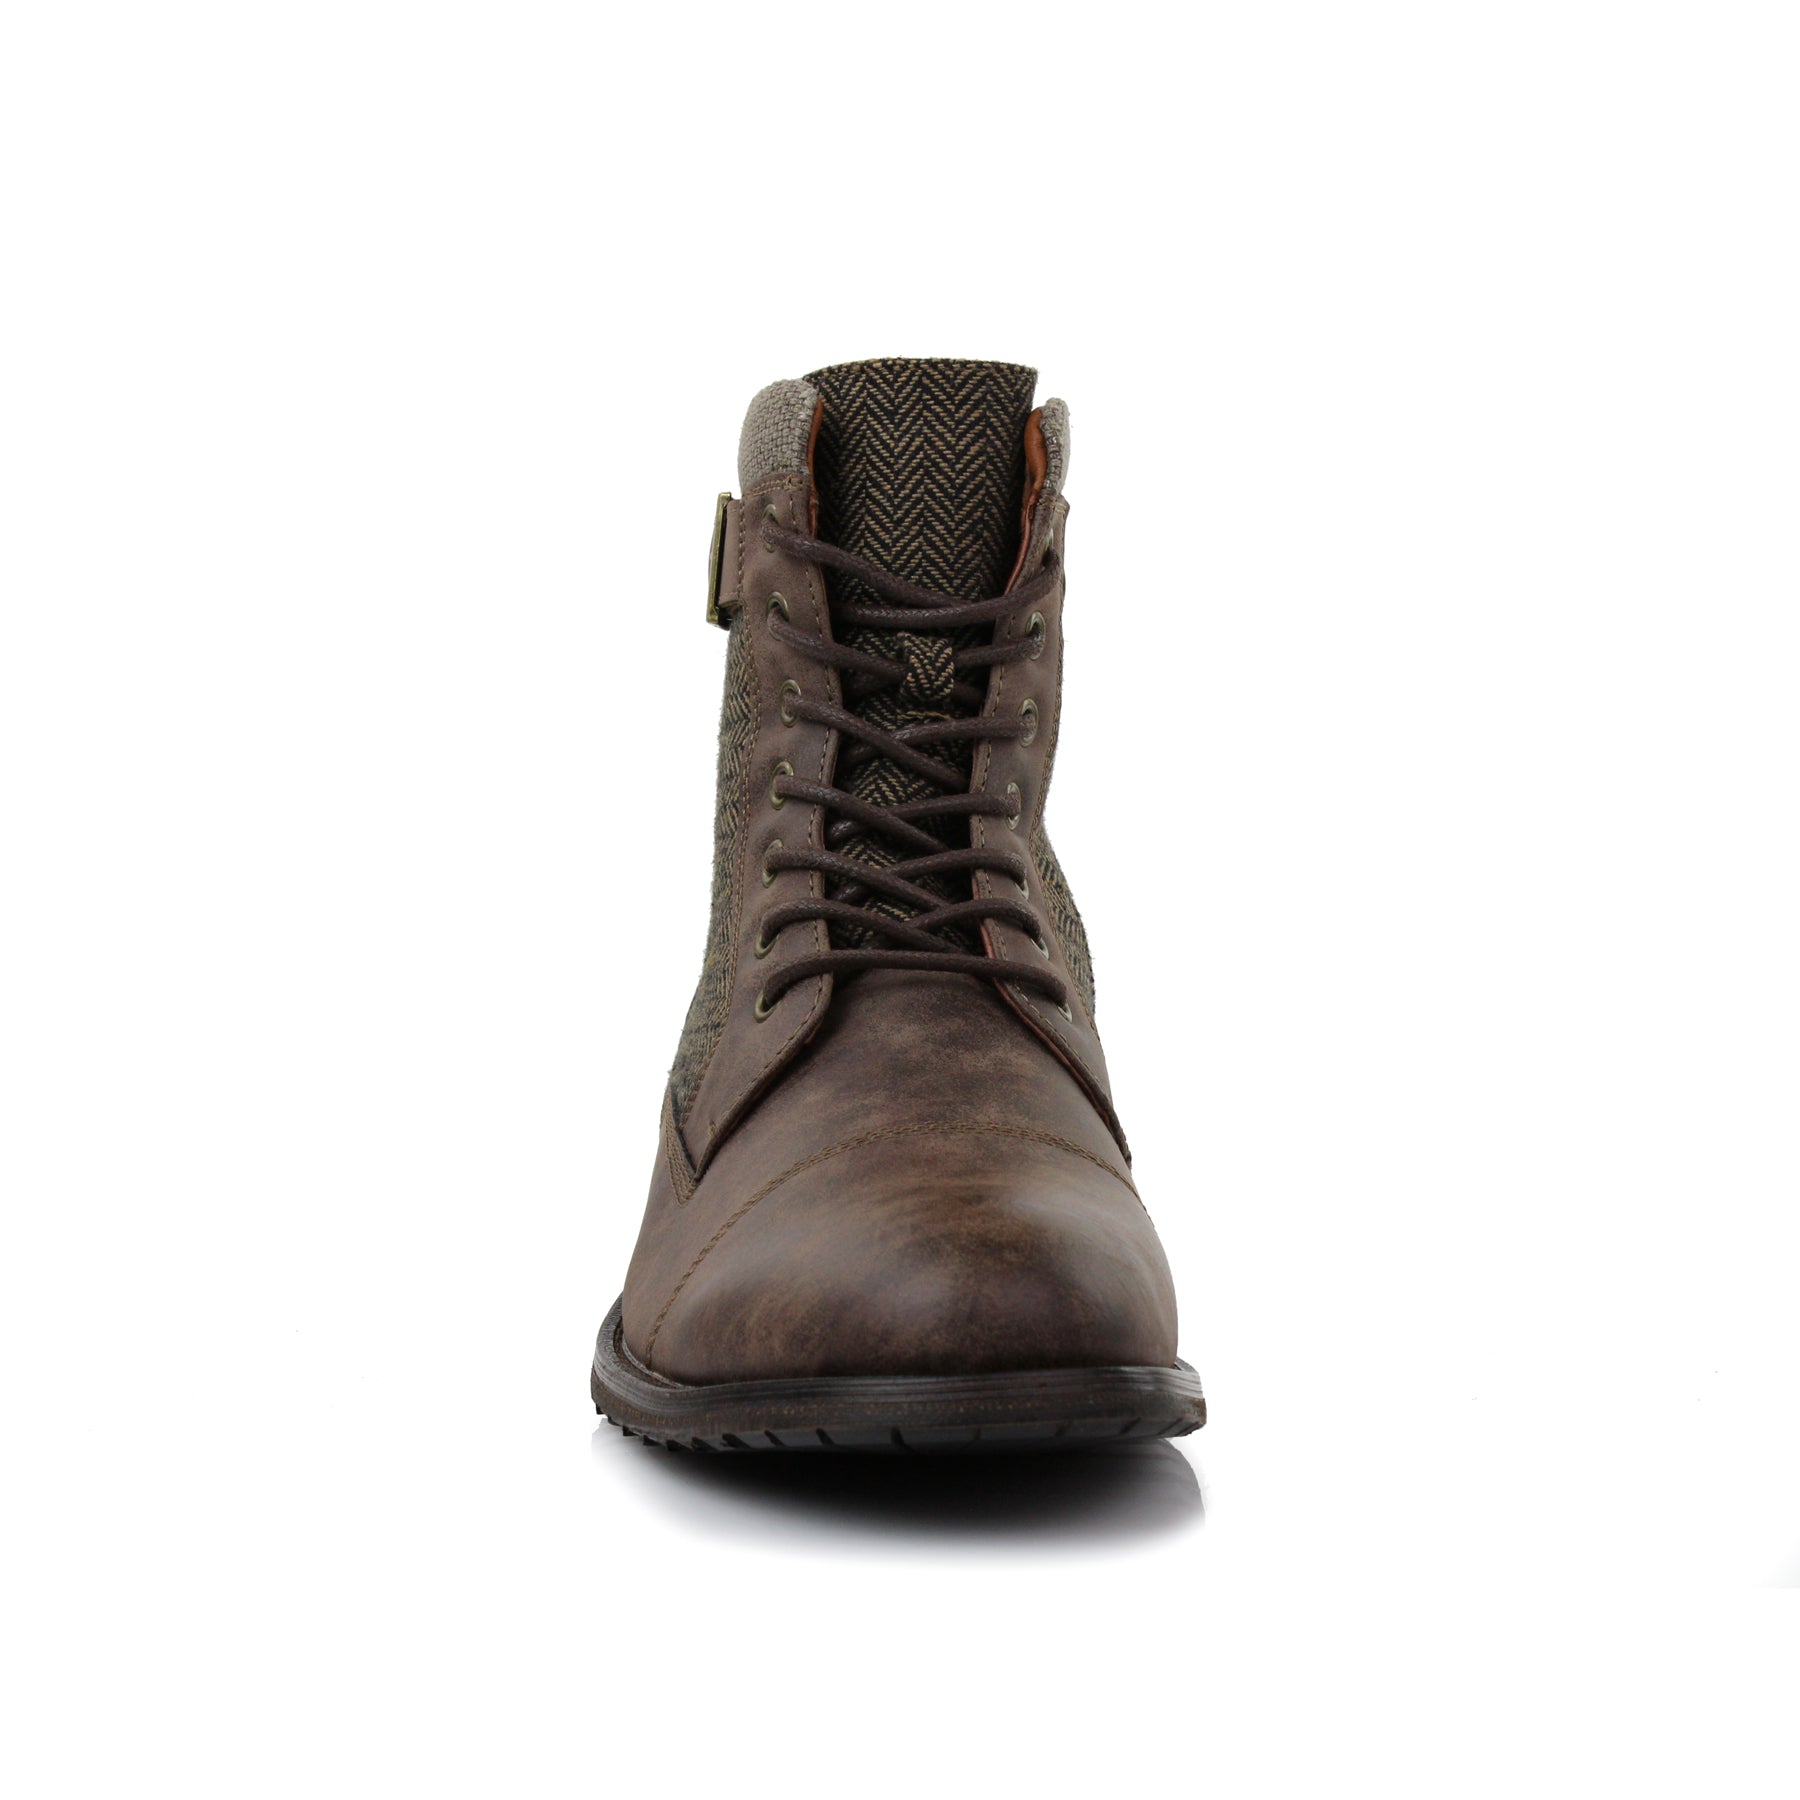 Rugged Duo-Textured Boots | Elijah by Polar Fox | Conal Footwear | Front Angle View